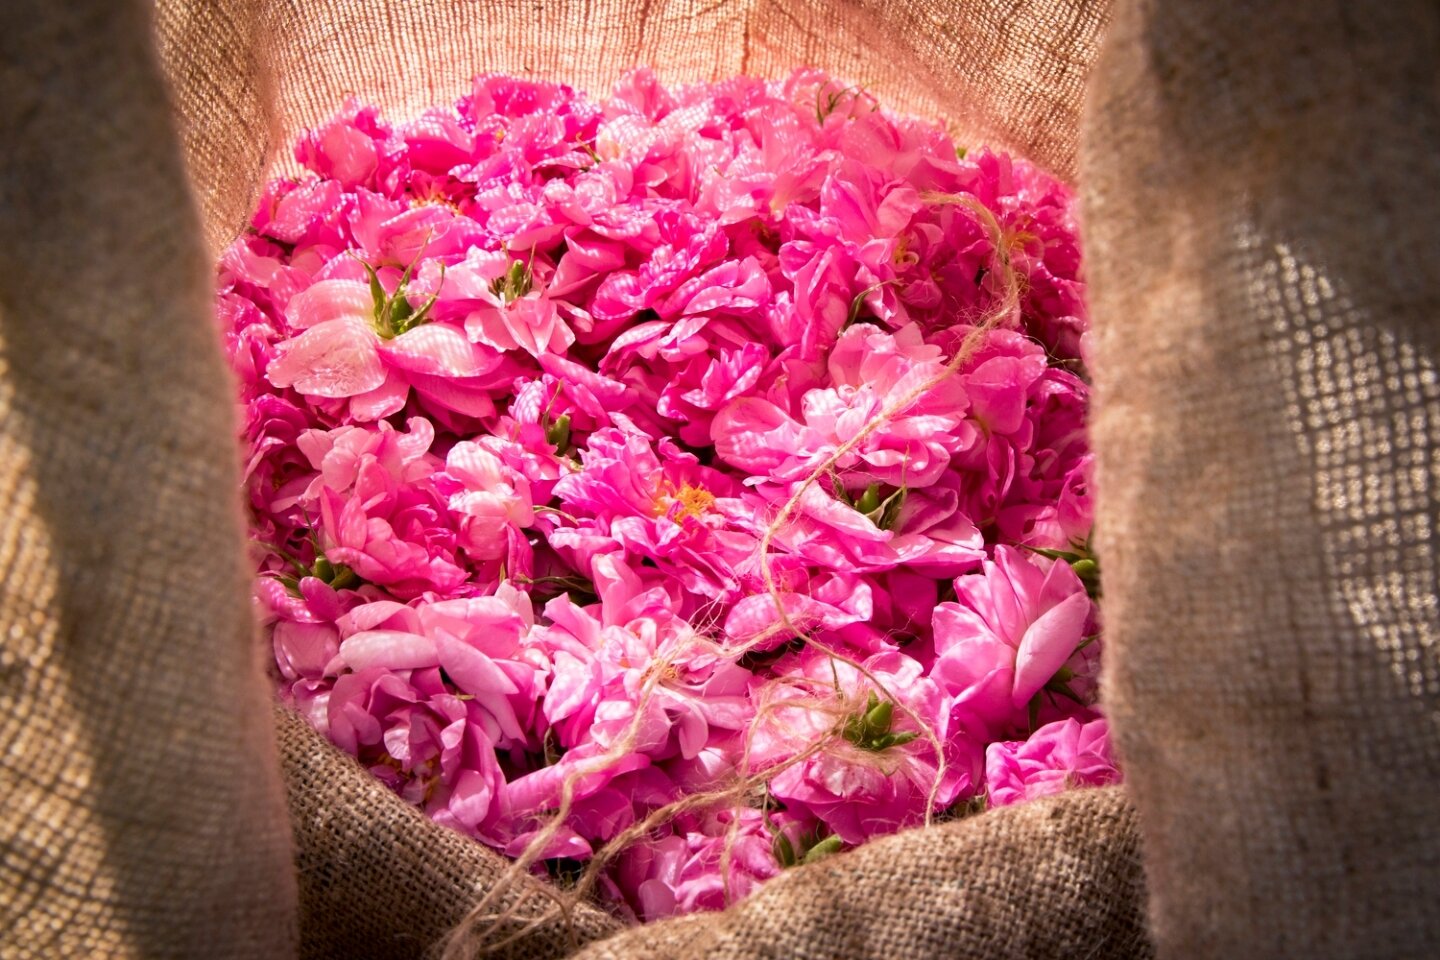 The flower harvest has begun! &quot;Centifolia&quot; roses, or &quot;roses de mai&quot; are the richly fragrant flowers used in perfumes grown for Dior, Chanel and other luxury brands. Nearby Grasse is the center of the perfume industry, and many of 